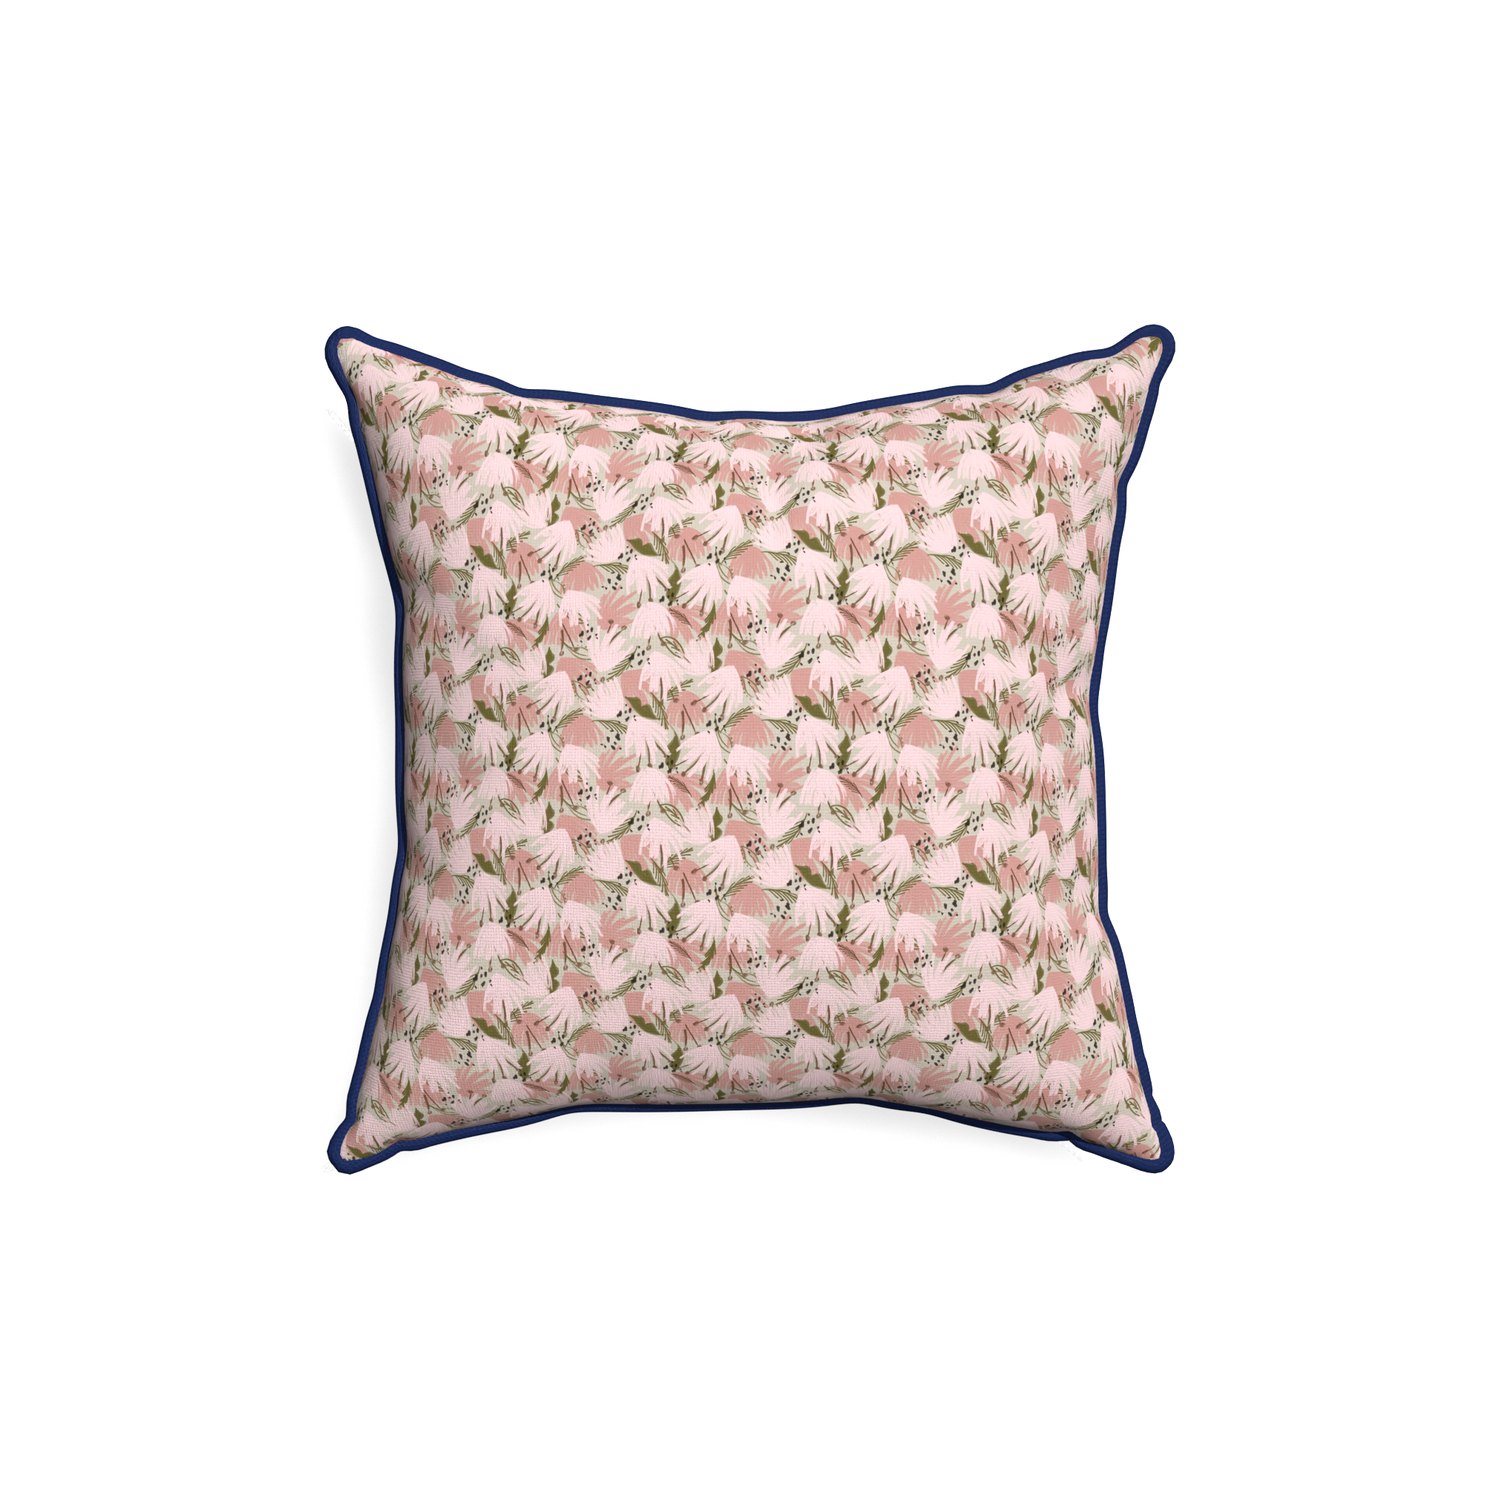 18-square eden pink custom pillow with midnight piping on white background